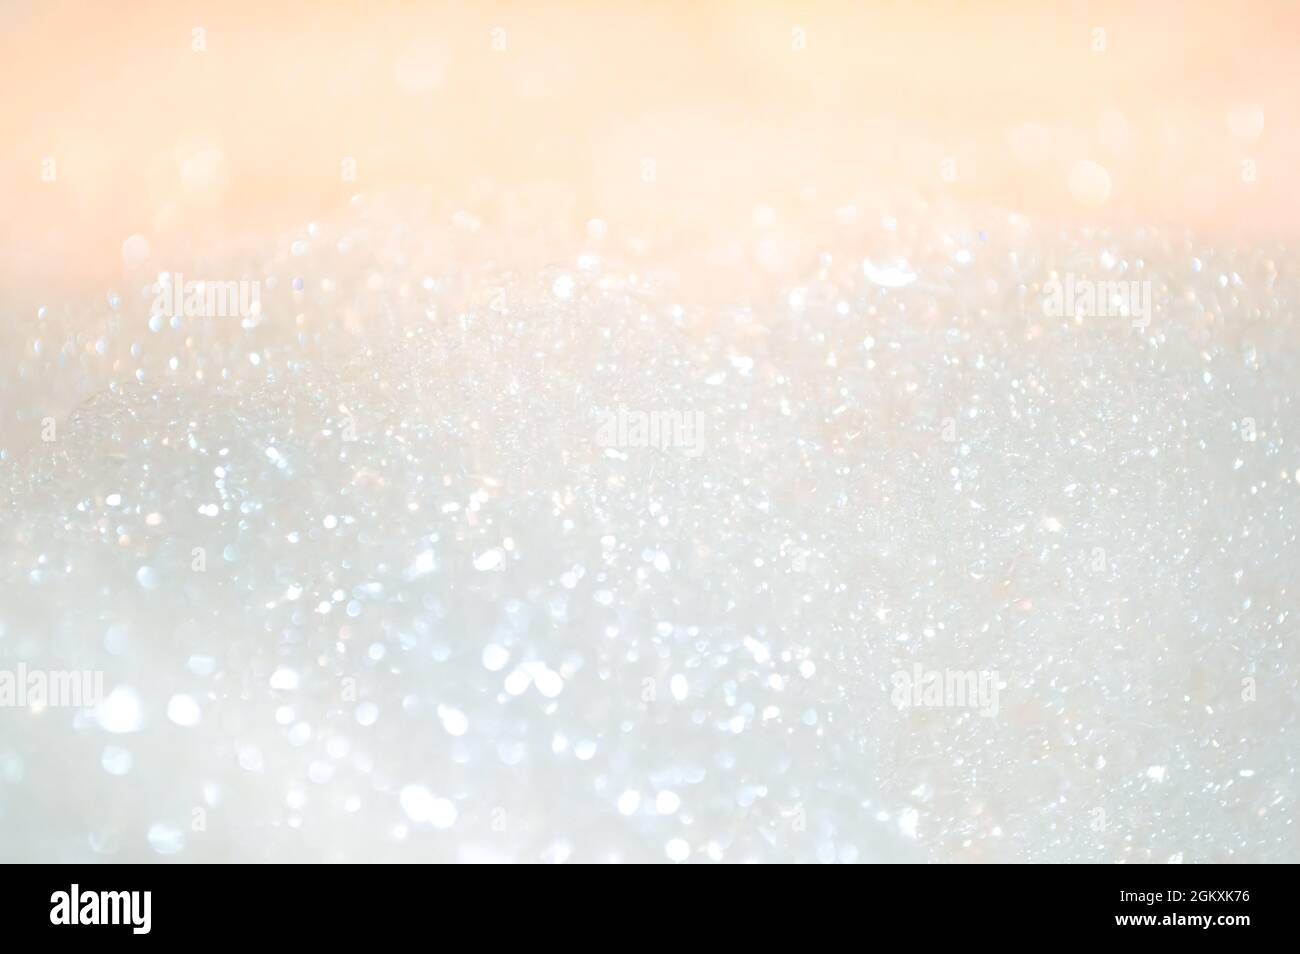 White Bubbles with Peach Background Stock Photo